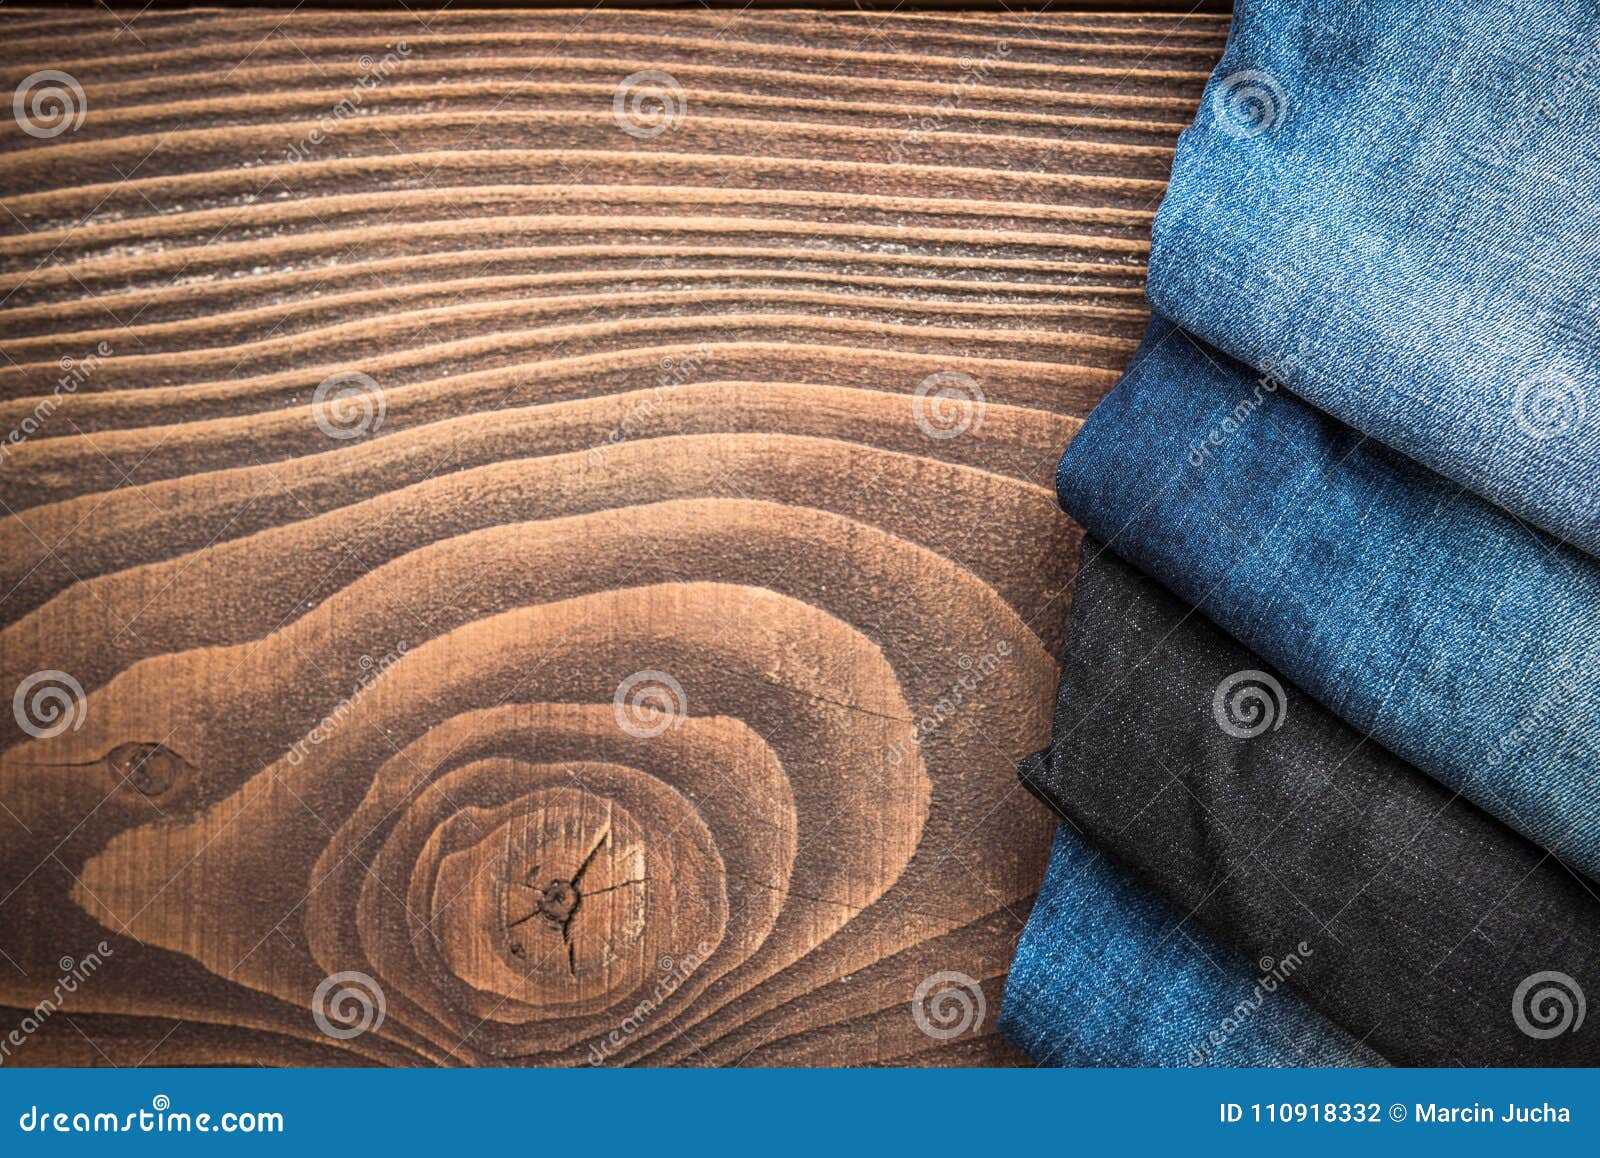 Jeans on Wooden Board with Copy Space Stock Photo - Image of grunge ...